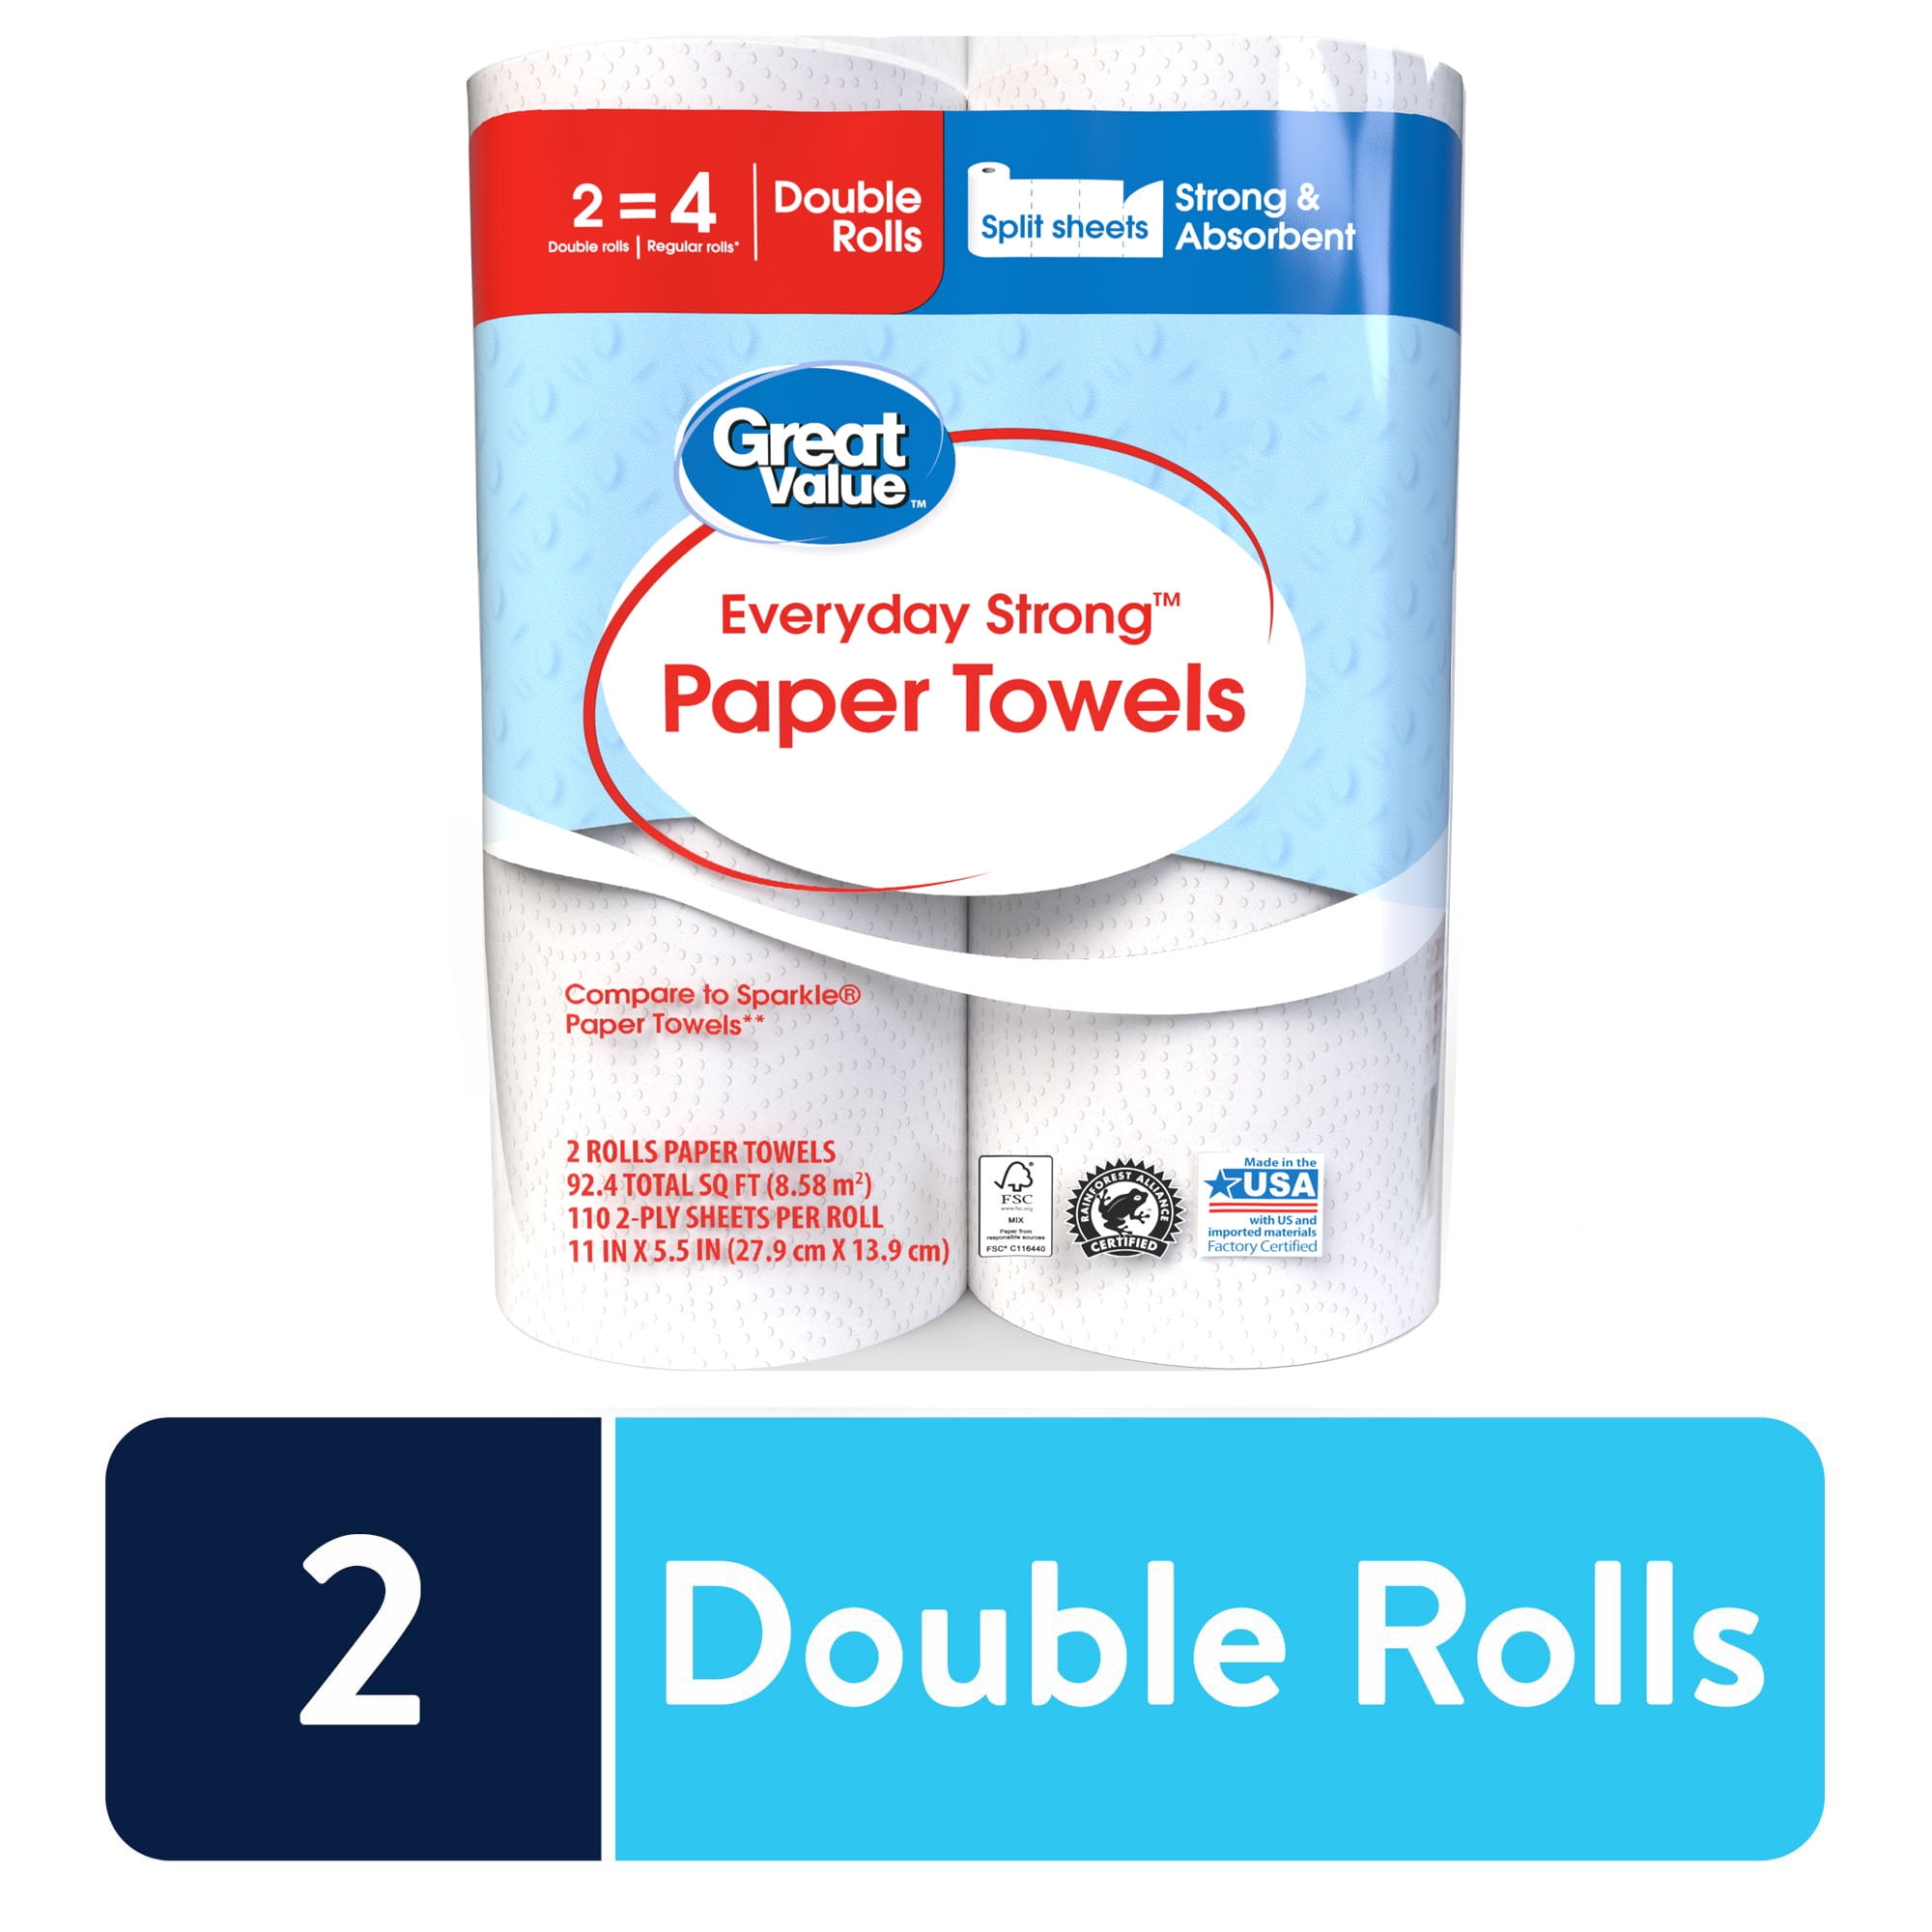 Great Value Everyday Strong Paper Towels, Split Sheet, 2 Double Rolls